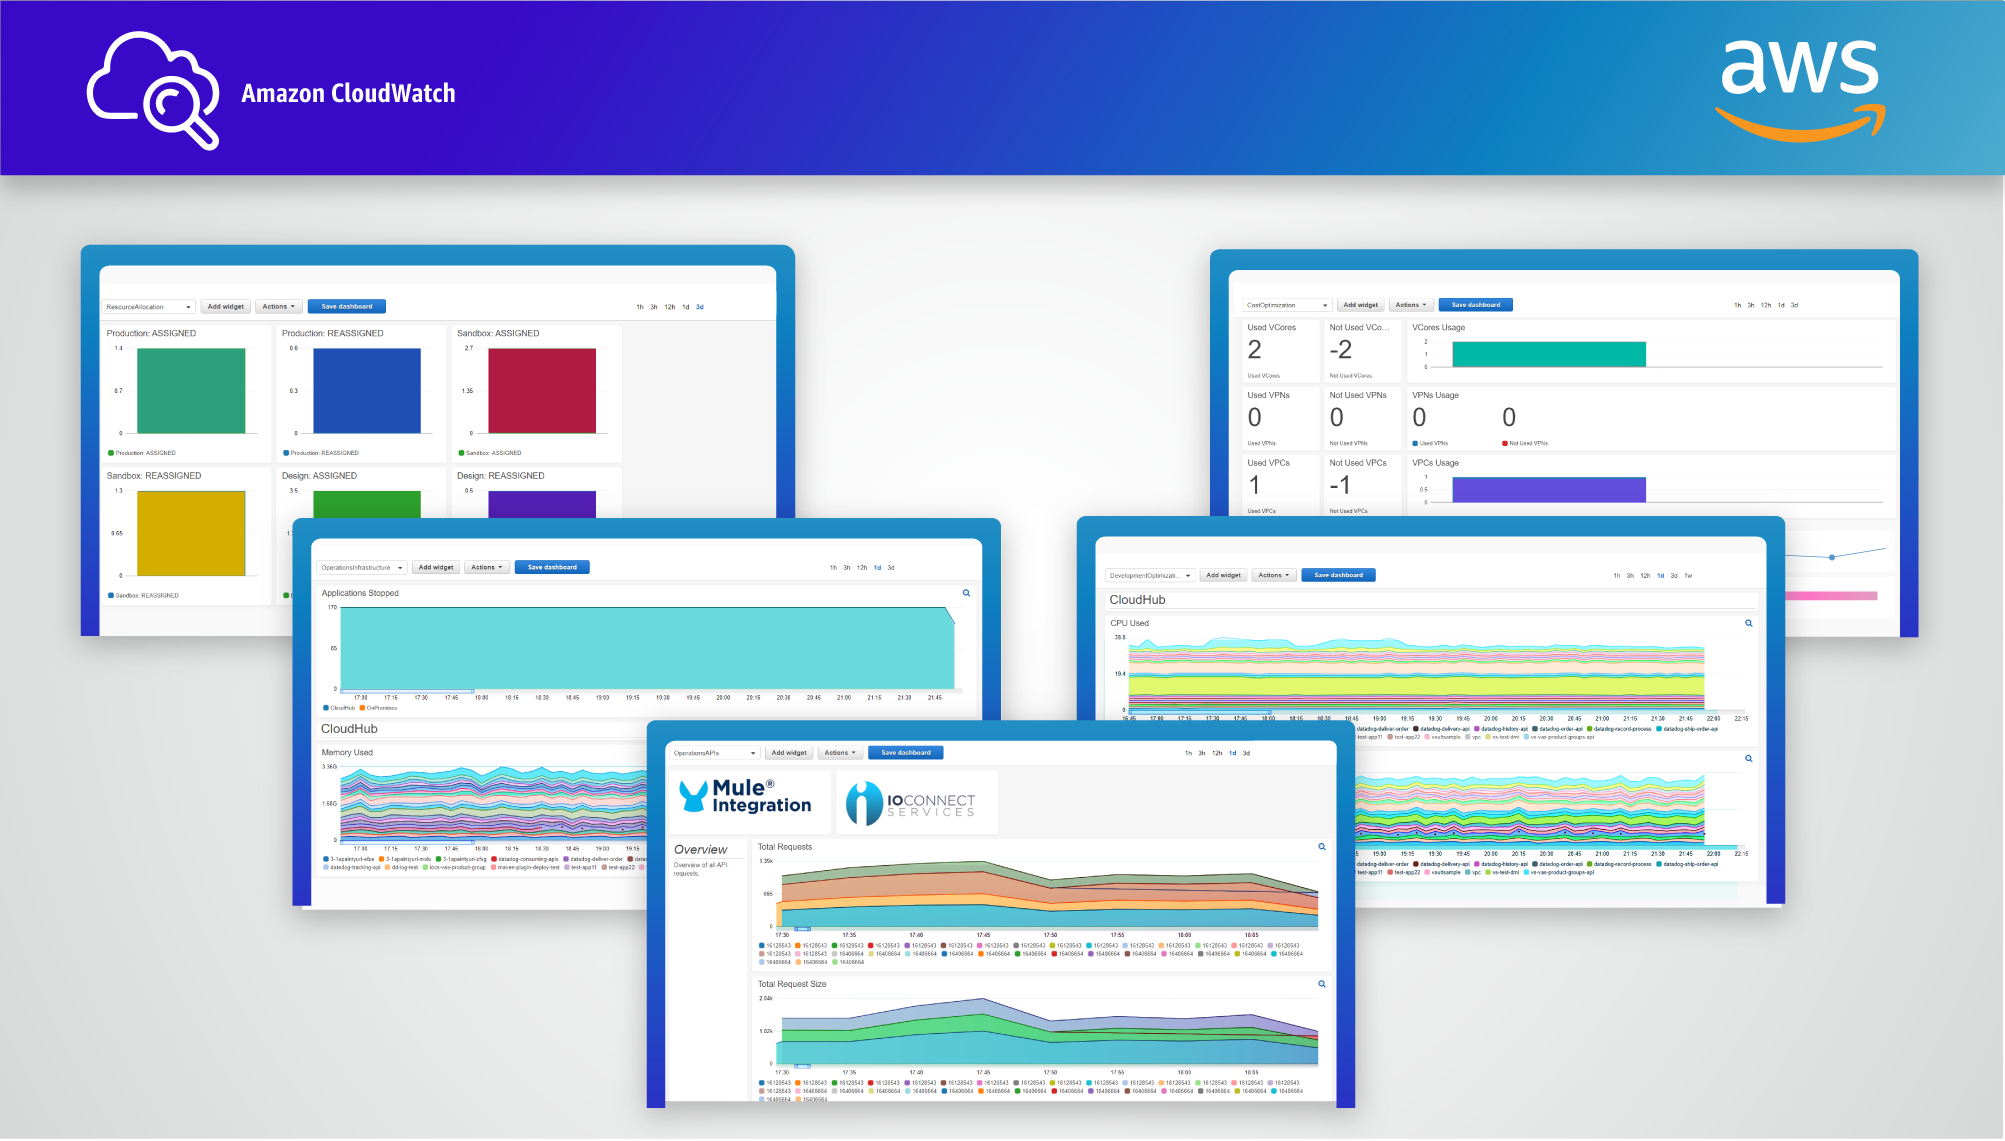 The CloudWatch Mule Integration dashboards monitor Mule applications with CloudWatch